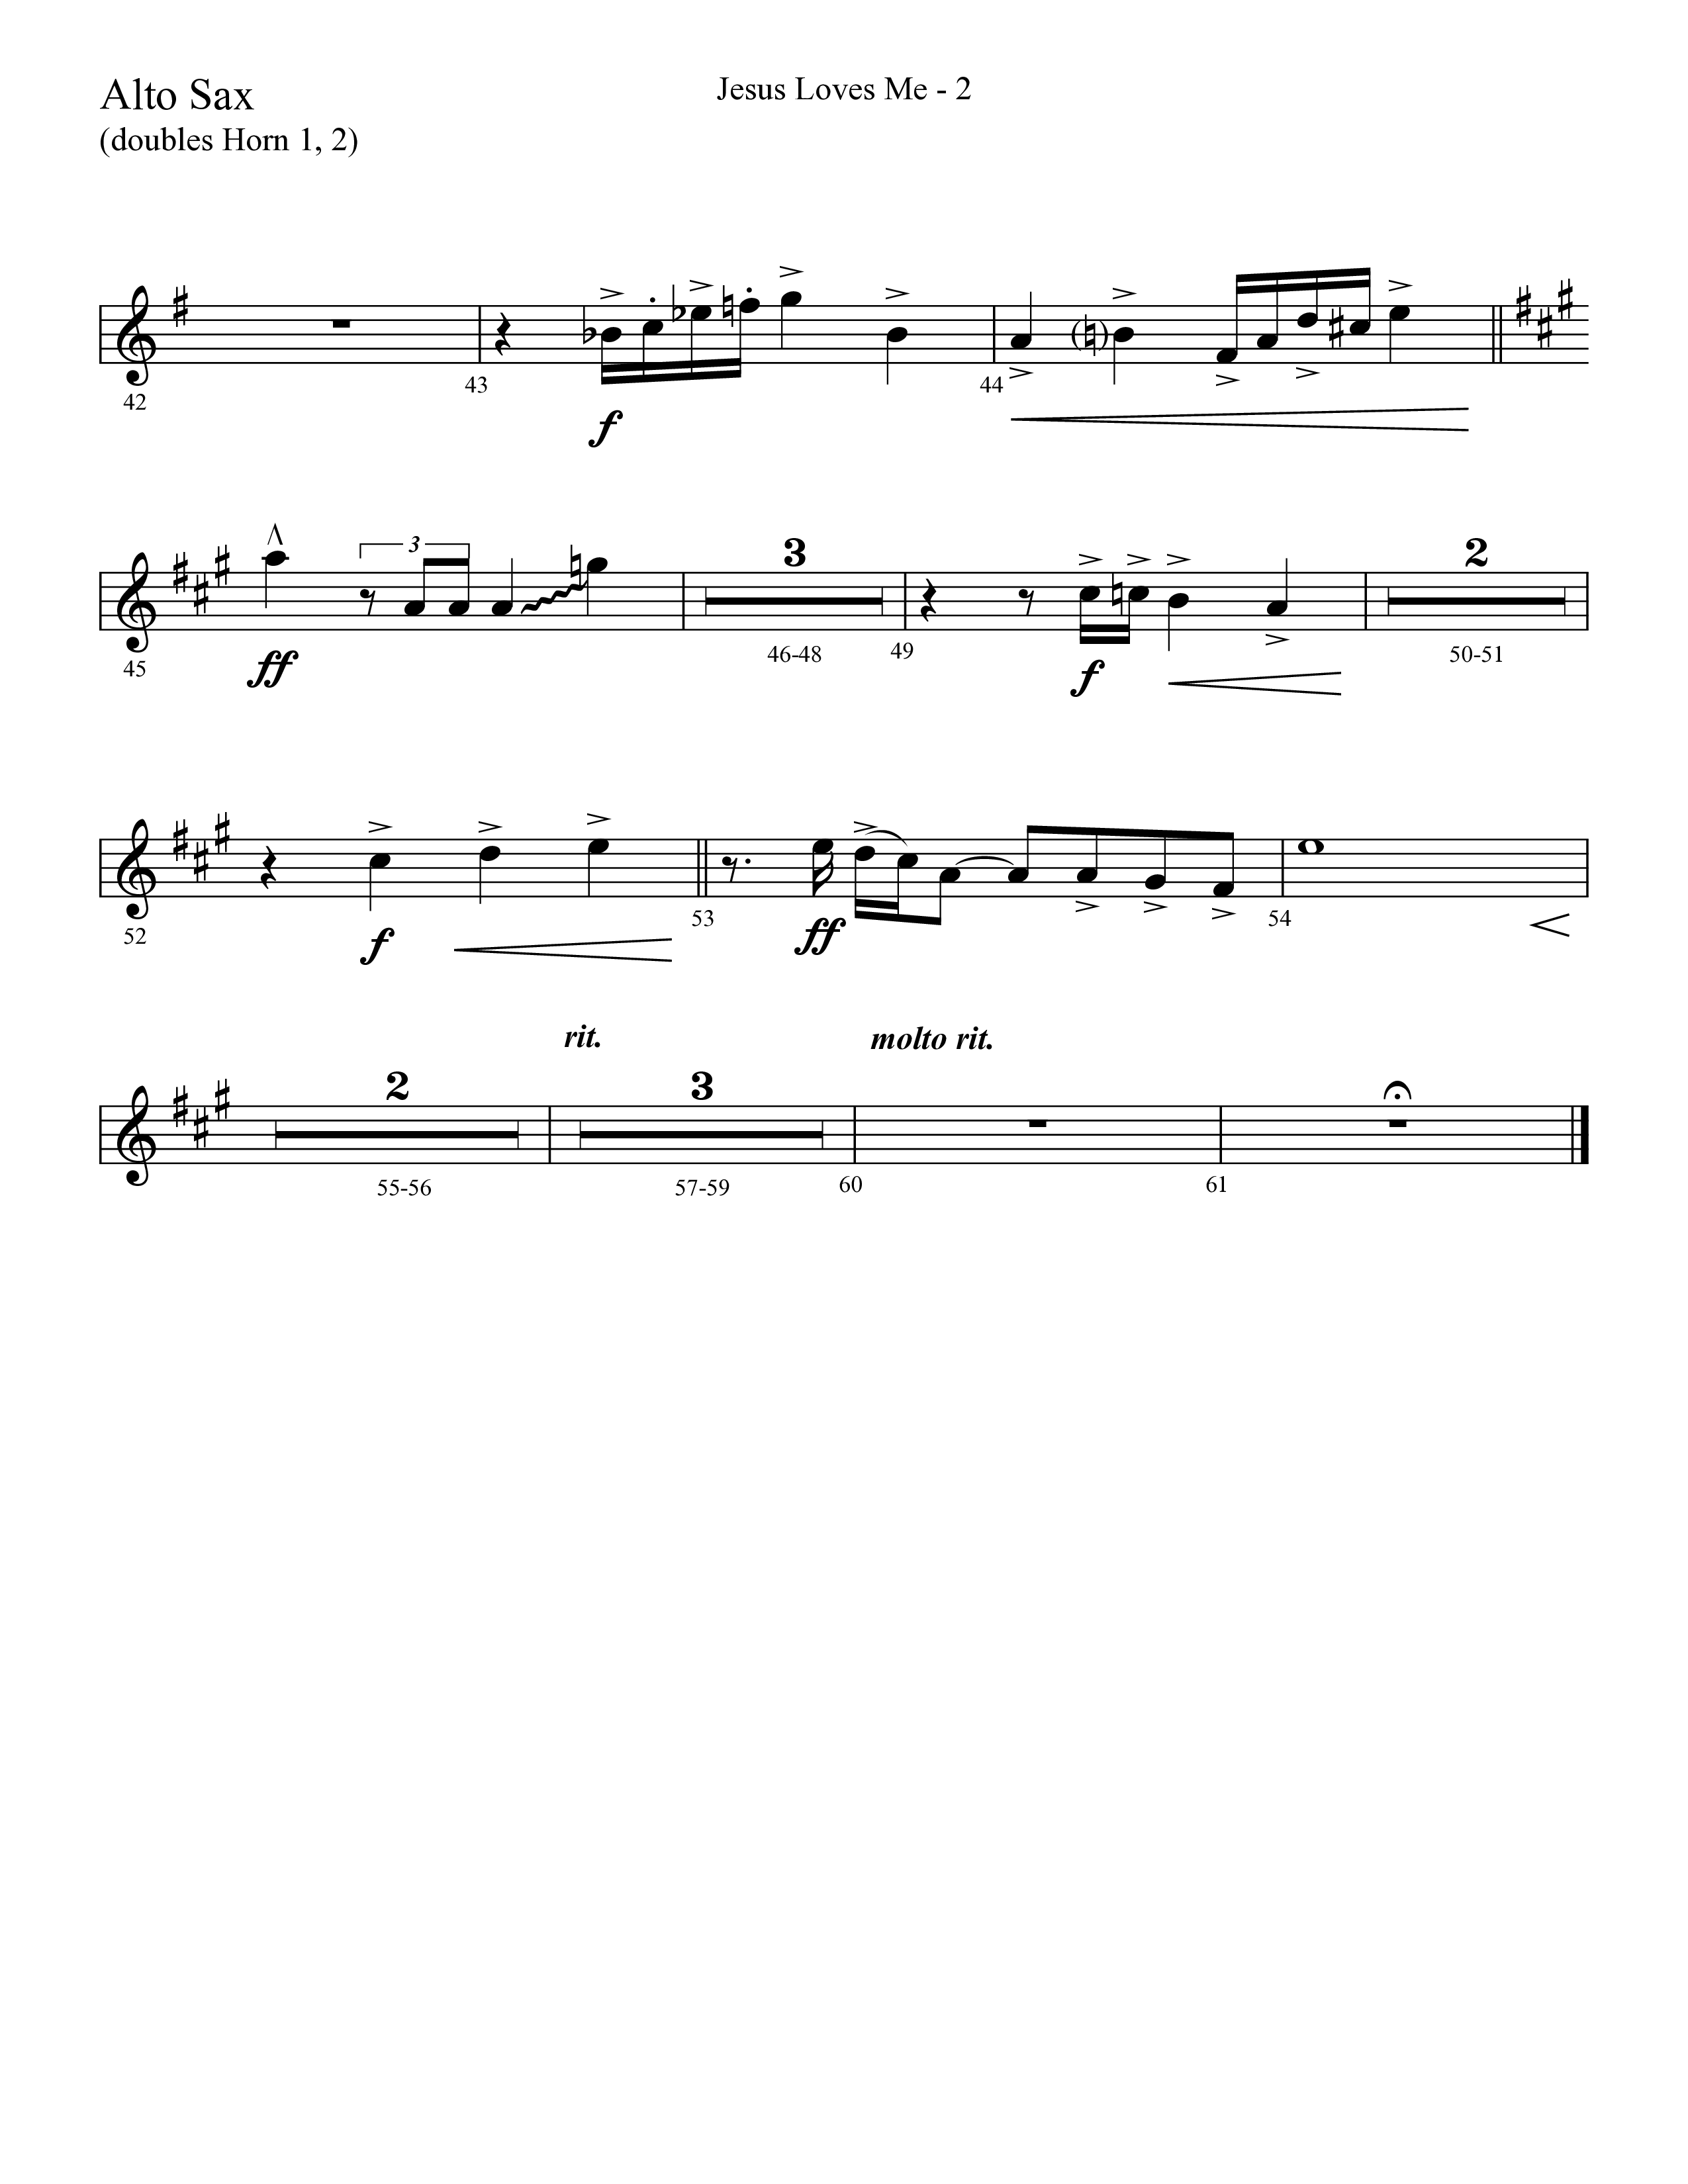 Jesus Loves Me with The Love Of God (Choral Anthem SATB) Alto Sax (Lifeway Choral / Arr. Cliff Duren)